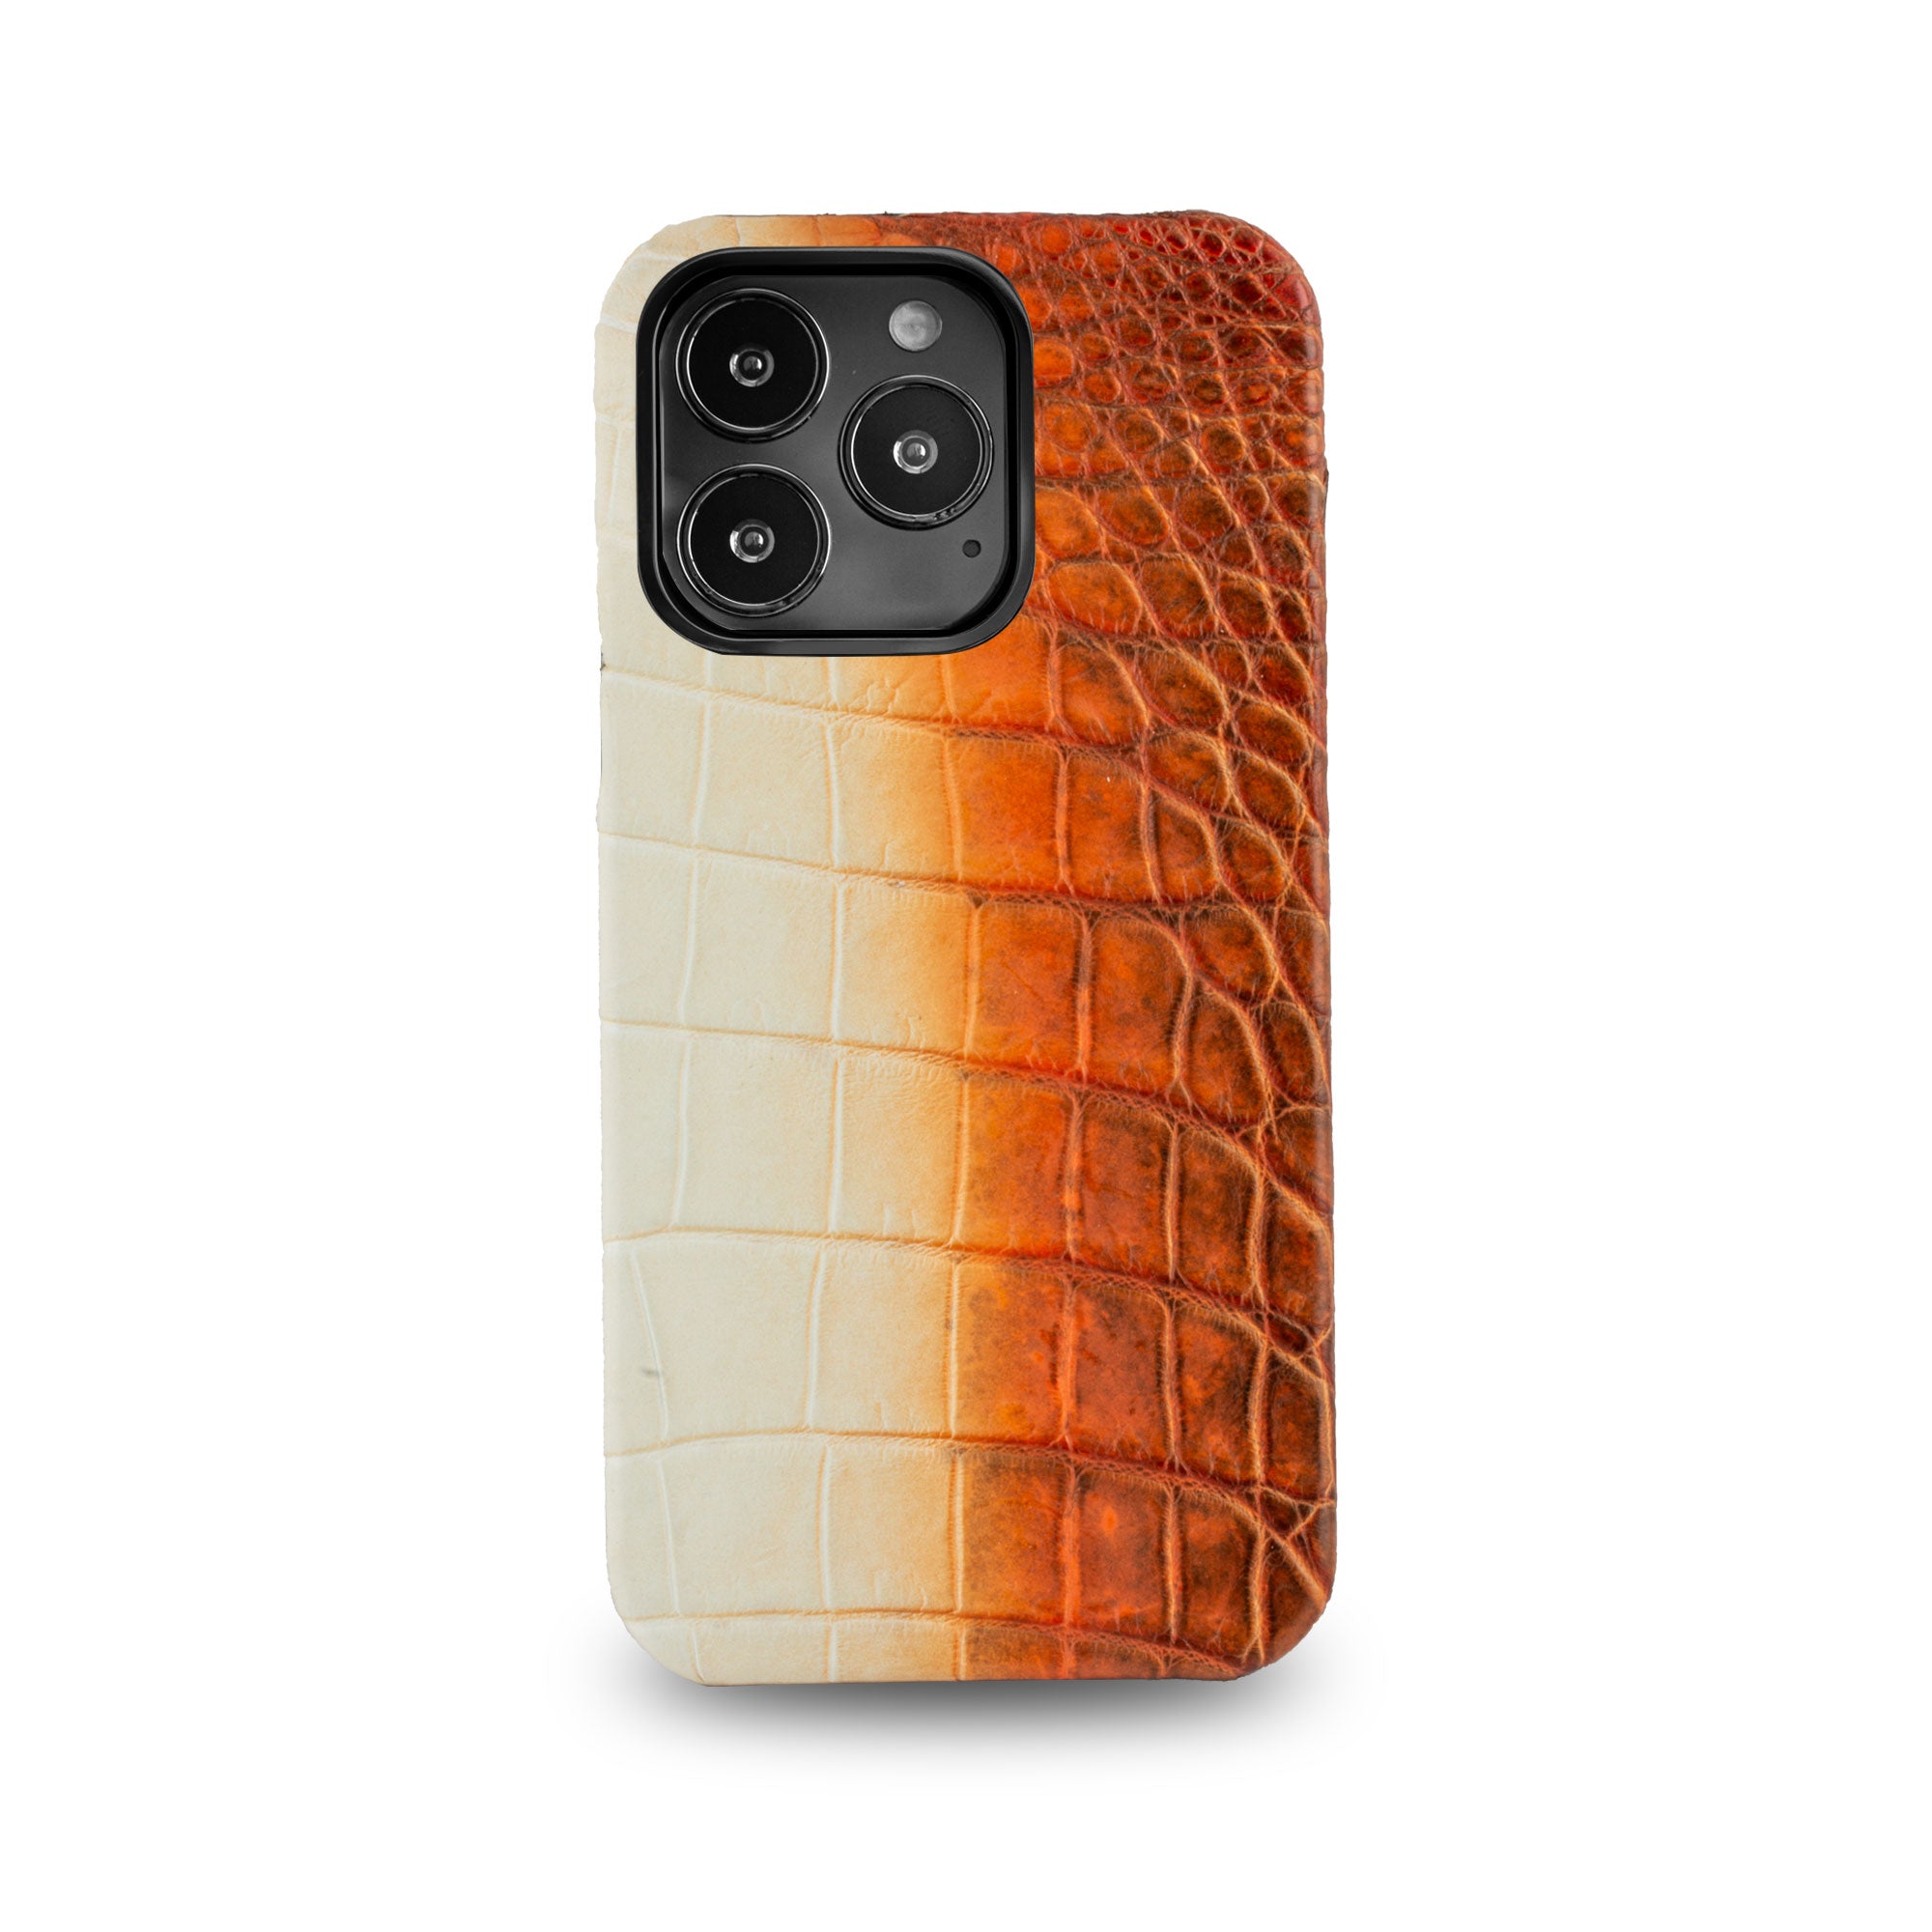 Leather iPhone HIMALAYA case / cover - iPhone 13 ( Pro / Max ) - Genuine alligator